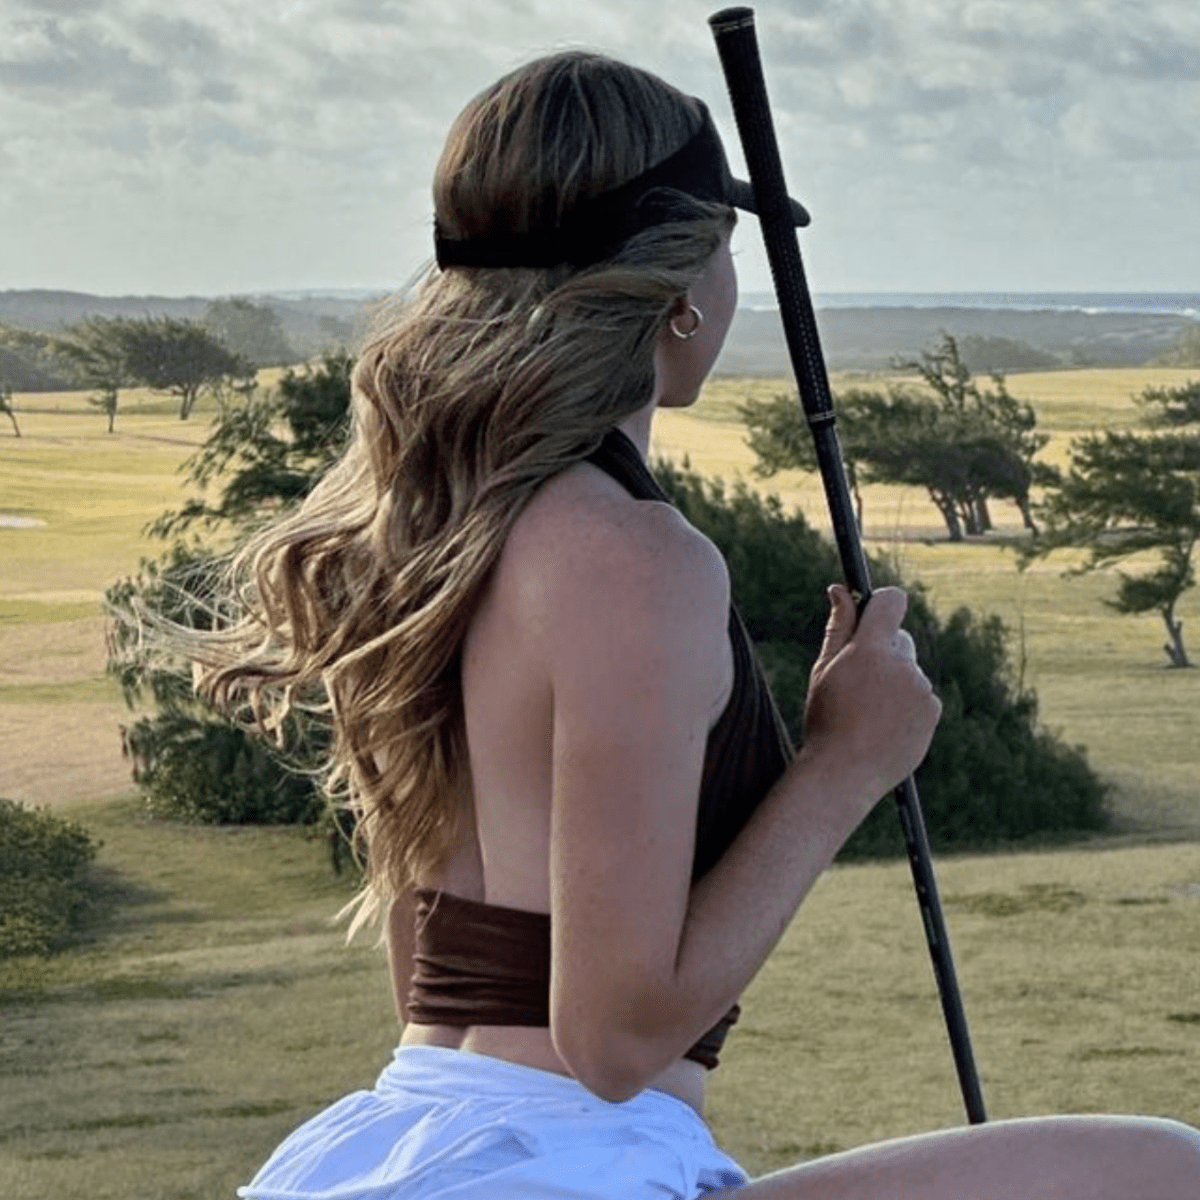 Paige Spiranac rival Grace Charis joins no bra club as she offers